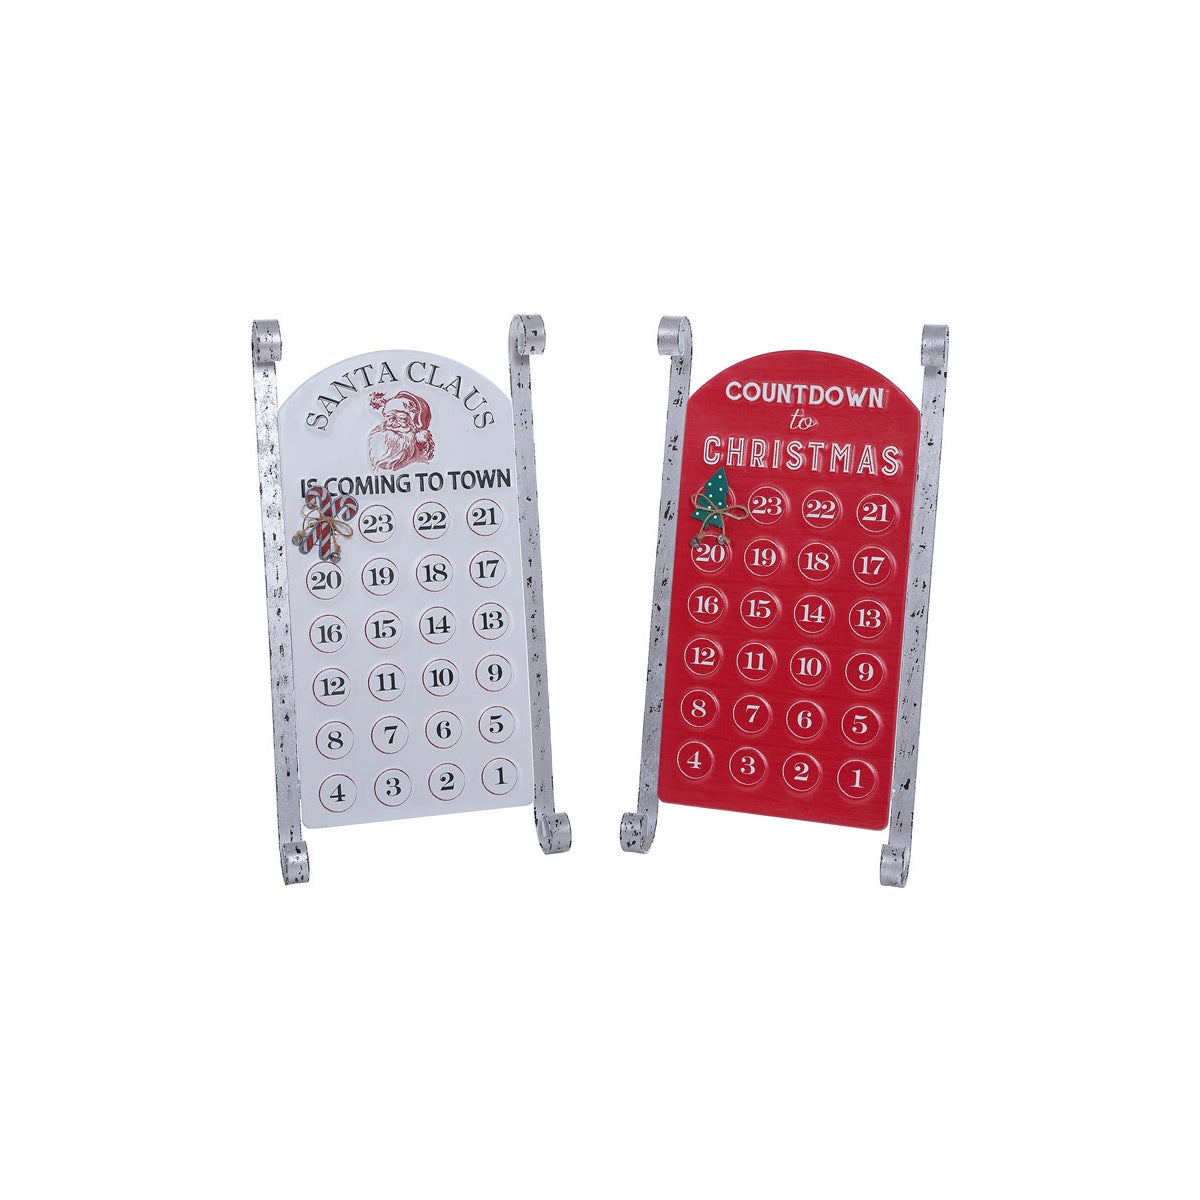 Enml Sug/Strps Magnet/Count Sleigh Easel 2 Asst